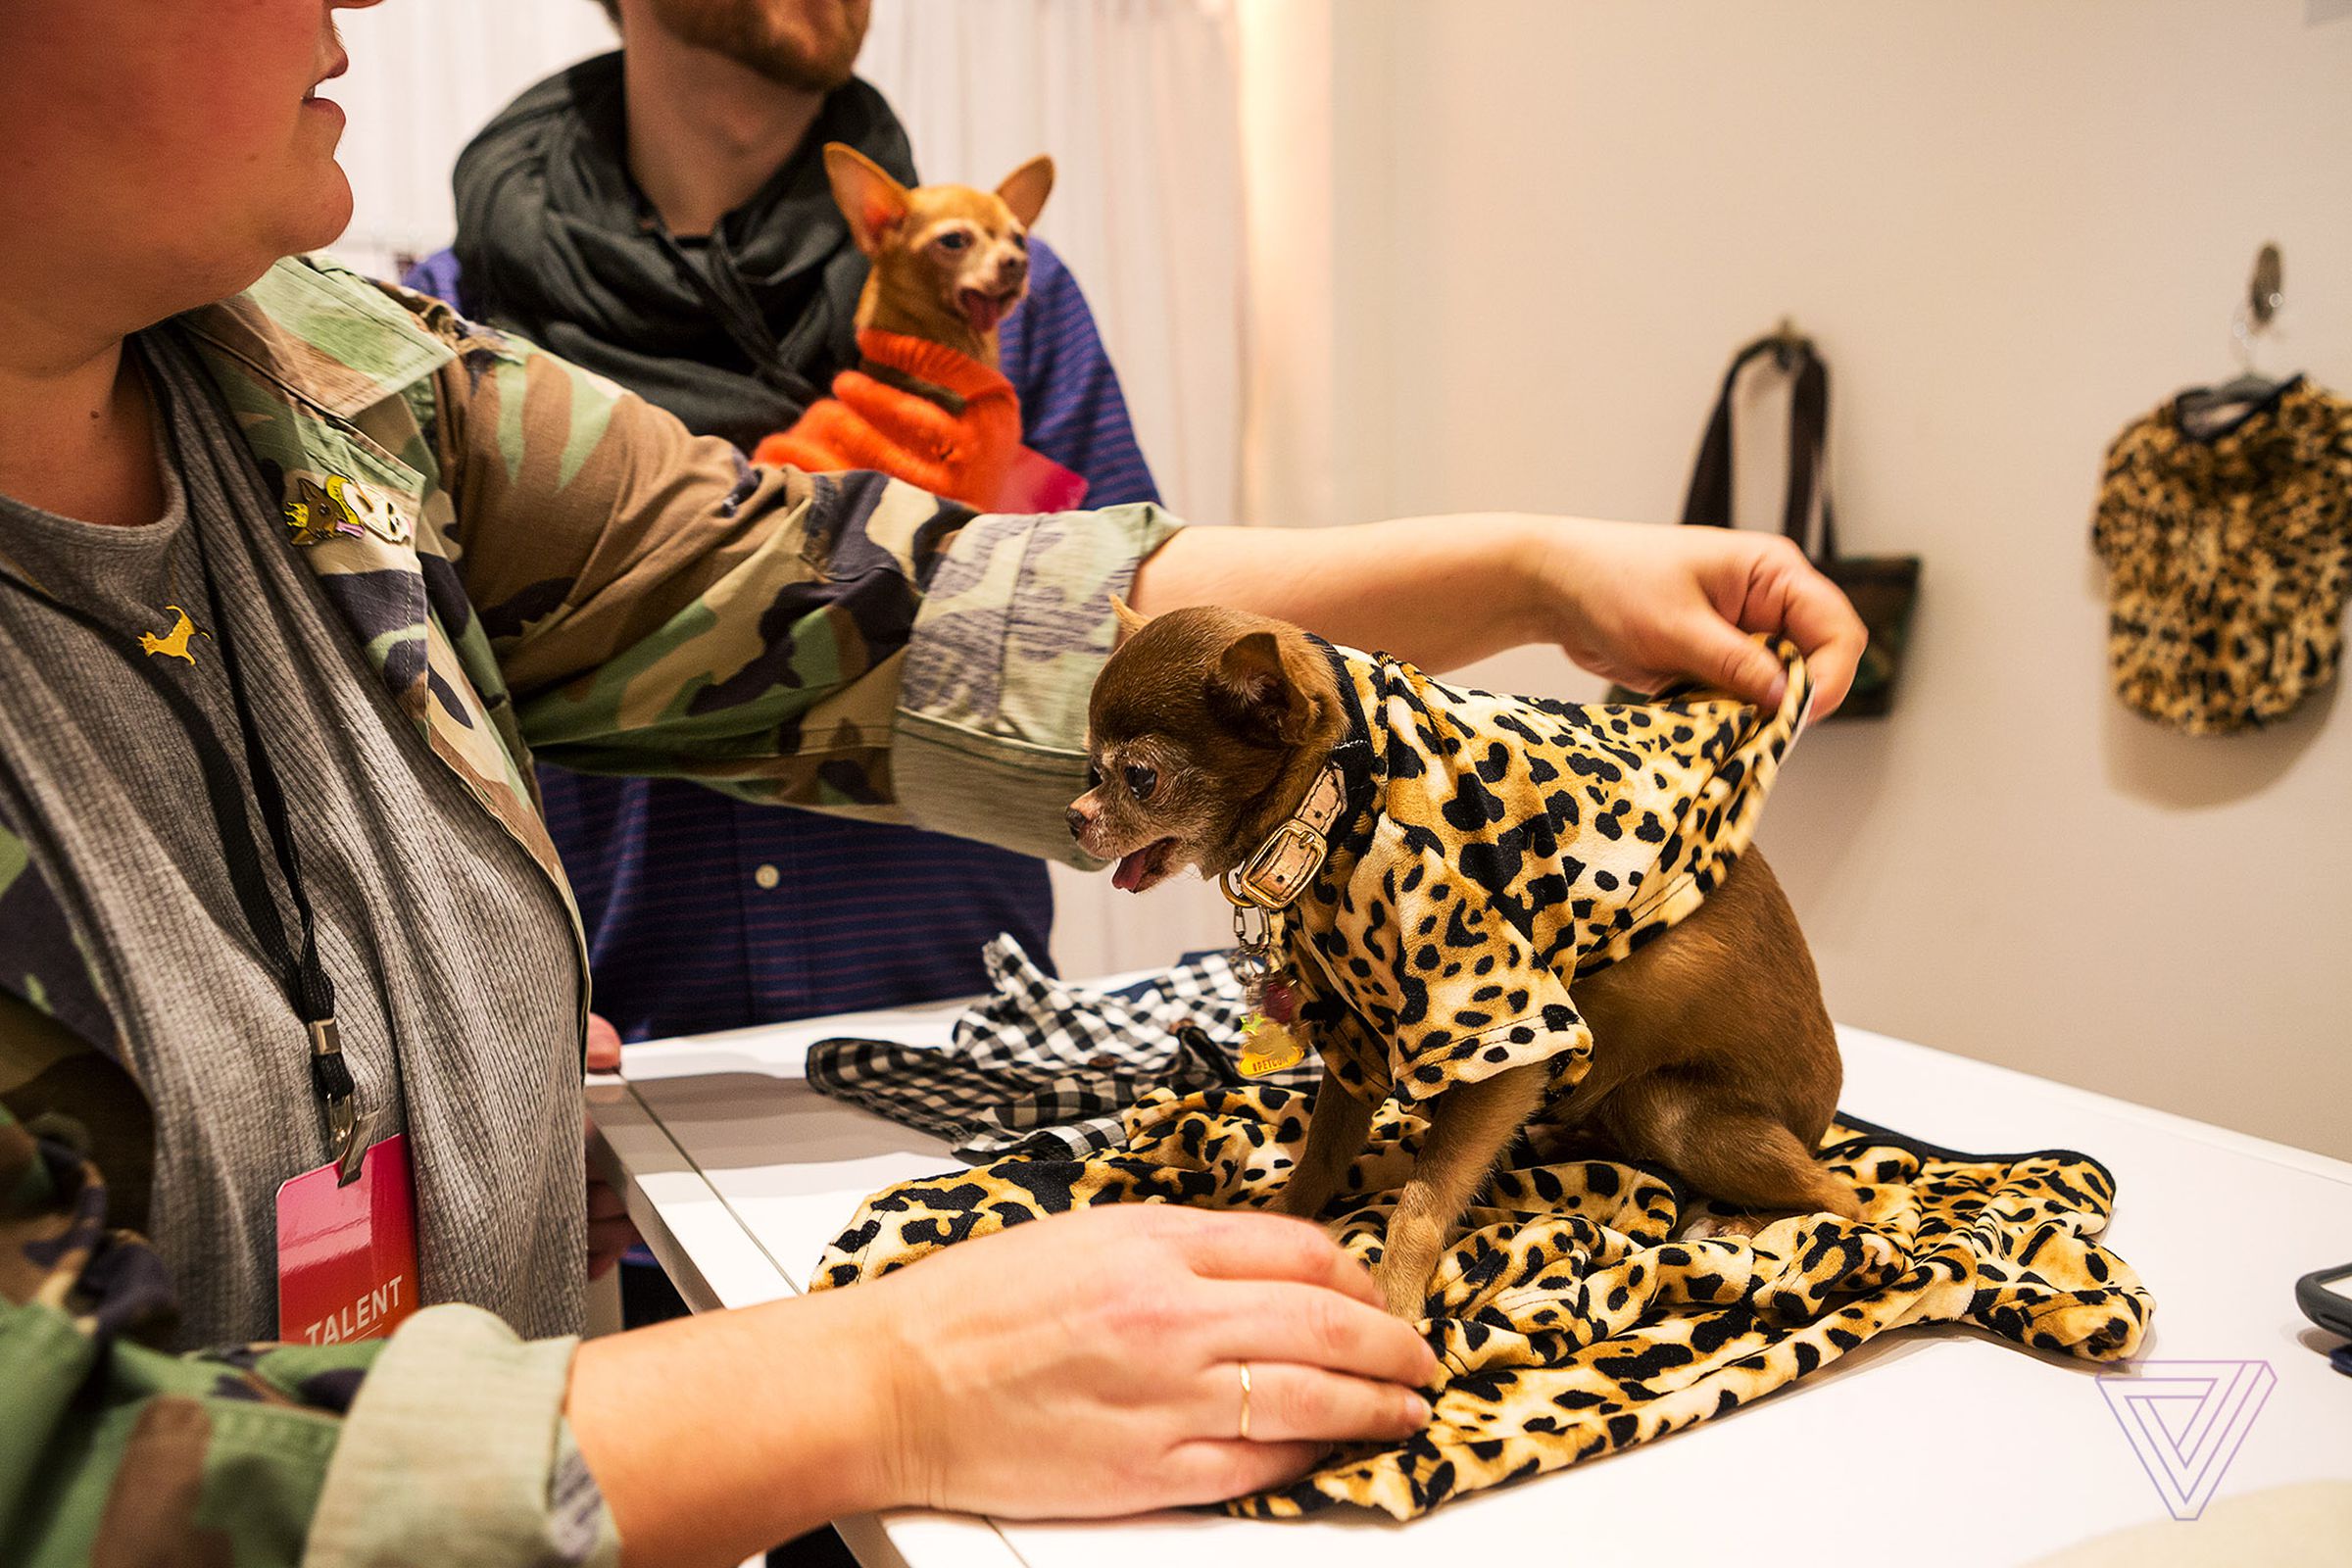 Chloe Kardoggian (@chloekardoggian) tries on a $55 leopard print pull-over at a retail booth PetCon. The chihuahua has 152,000 followers on Instagram and boasts a closet of “50 outfits plus about 3 bins of wigs, accessories and props, not to mention her motorized car which does not fit in a bin” owner Dorie Herman told The Verge via email.